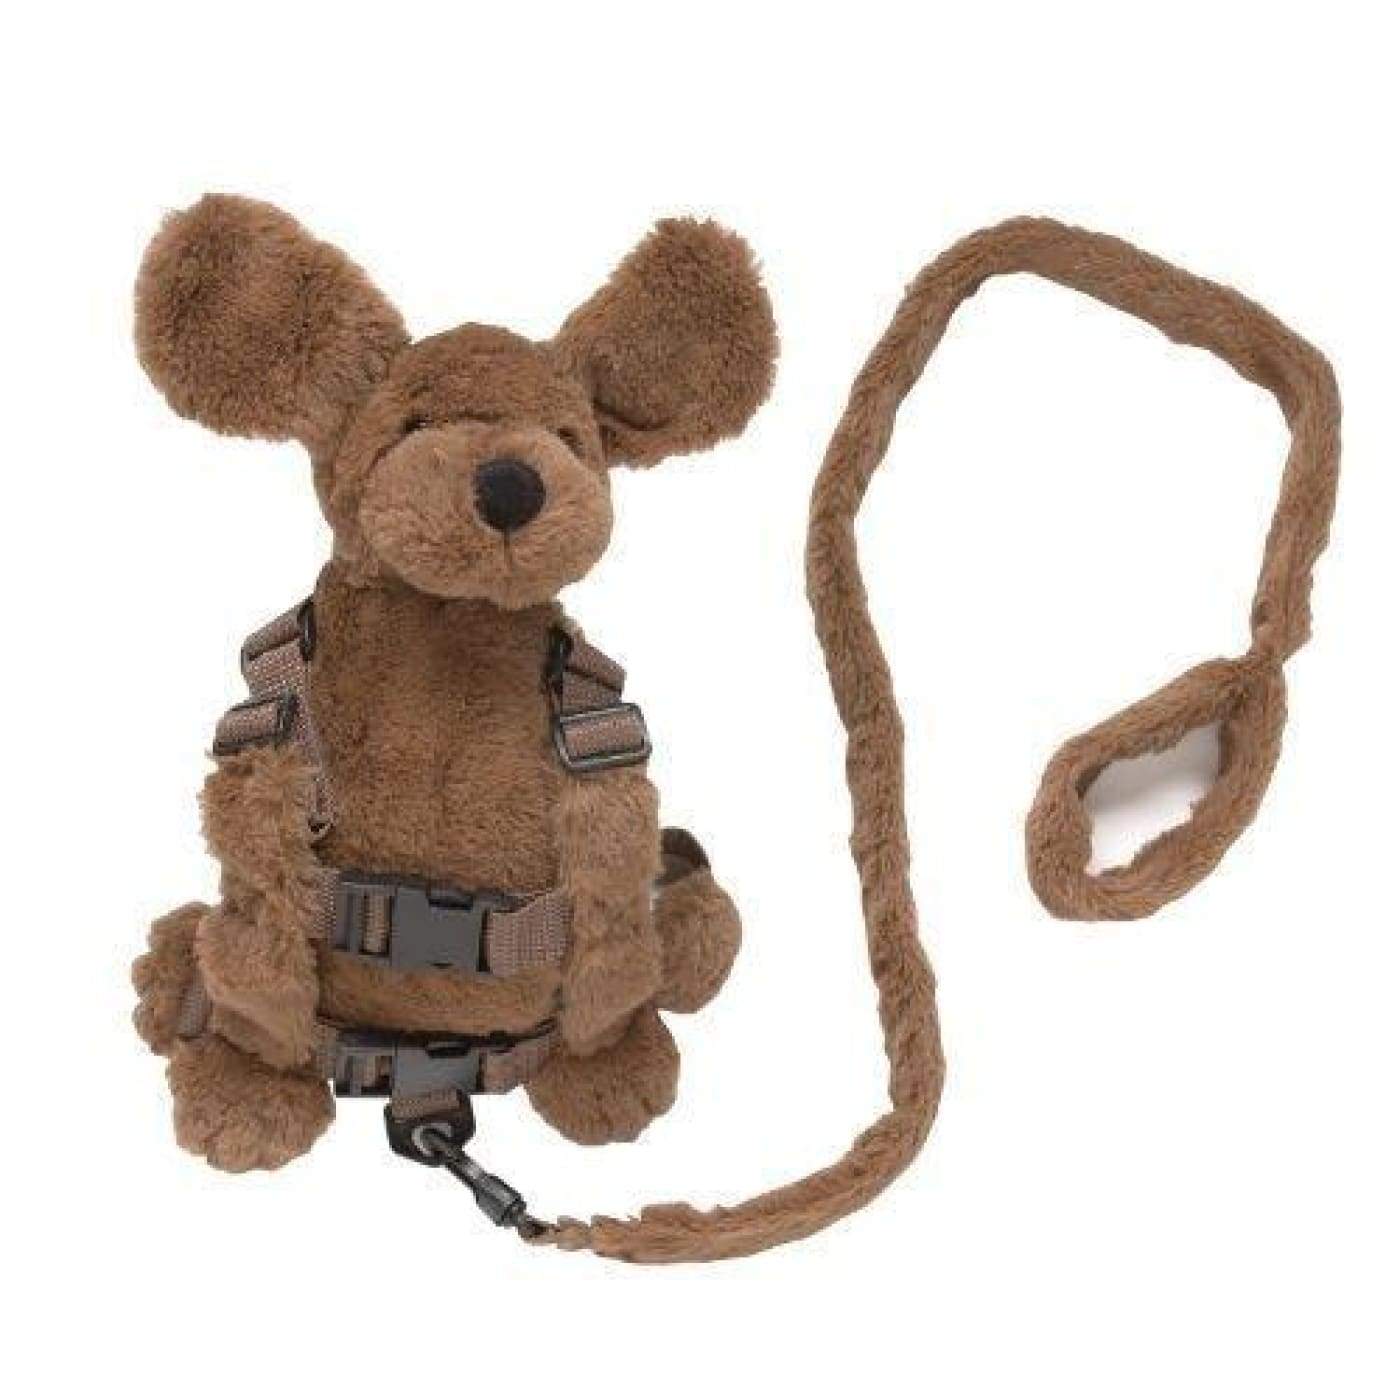 Playette 2 in 1 Harness Buddy - Fluffy Puppy - ON THE GO - SAFETY HARNESSES